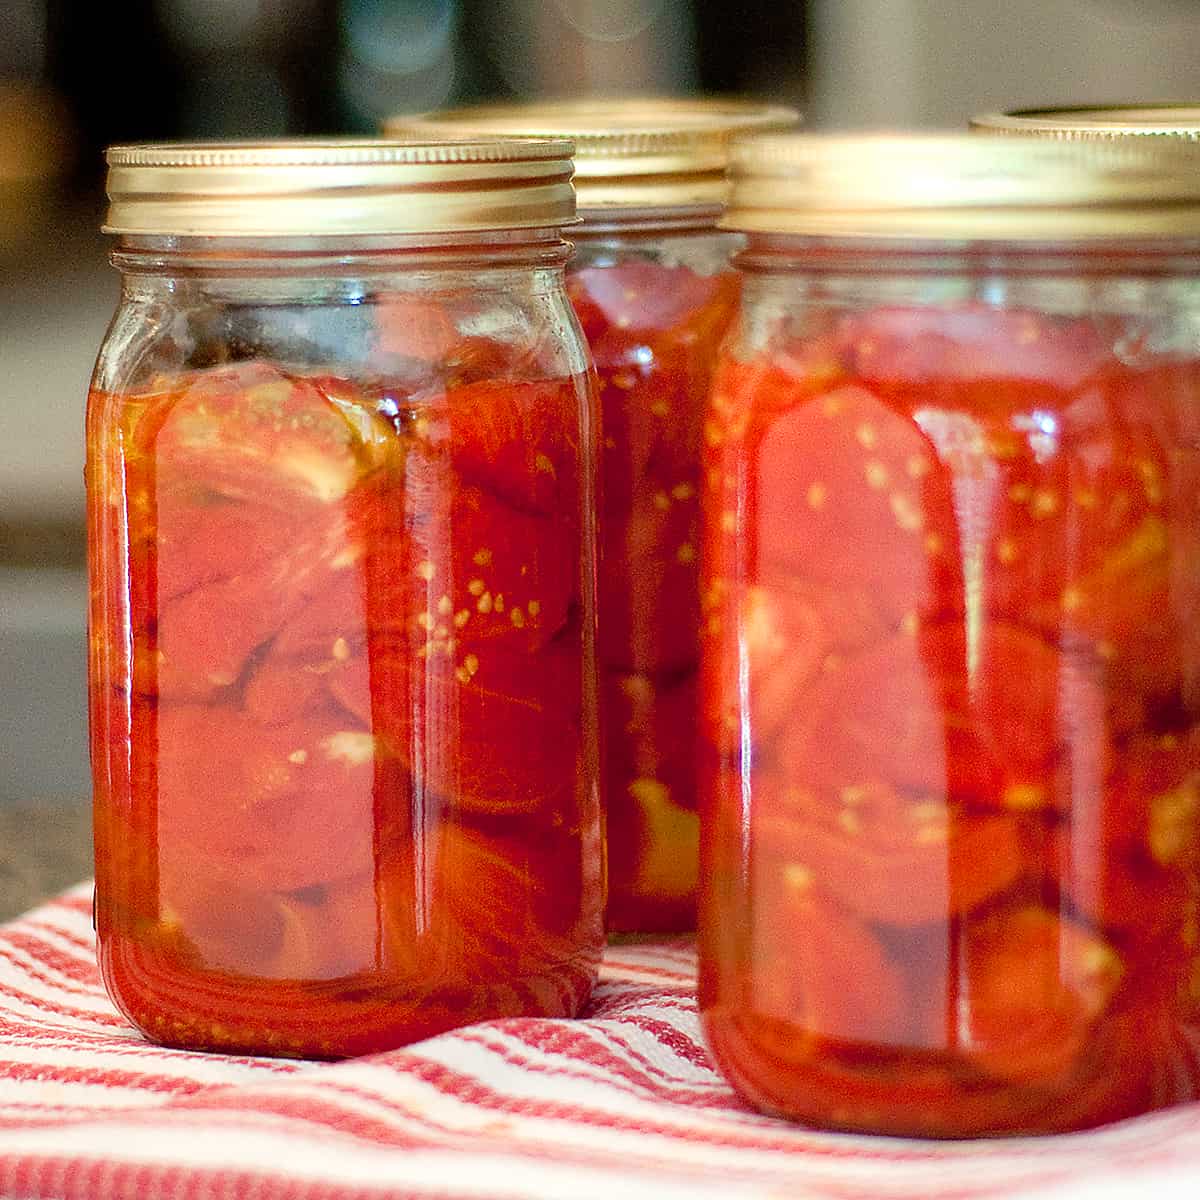 Home Canned Tomatoes From Never Enough Thyme,Spiderwort Leaves